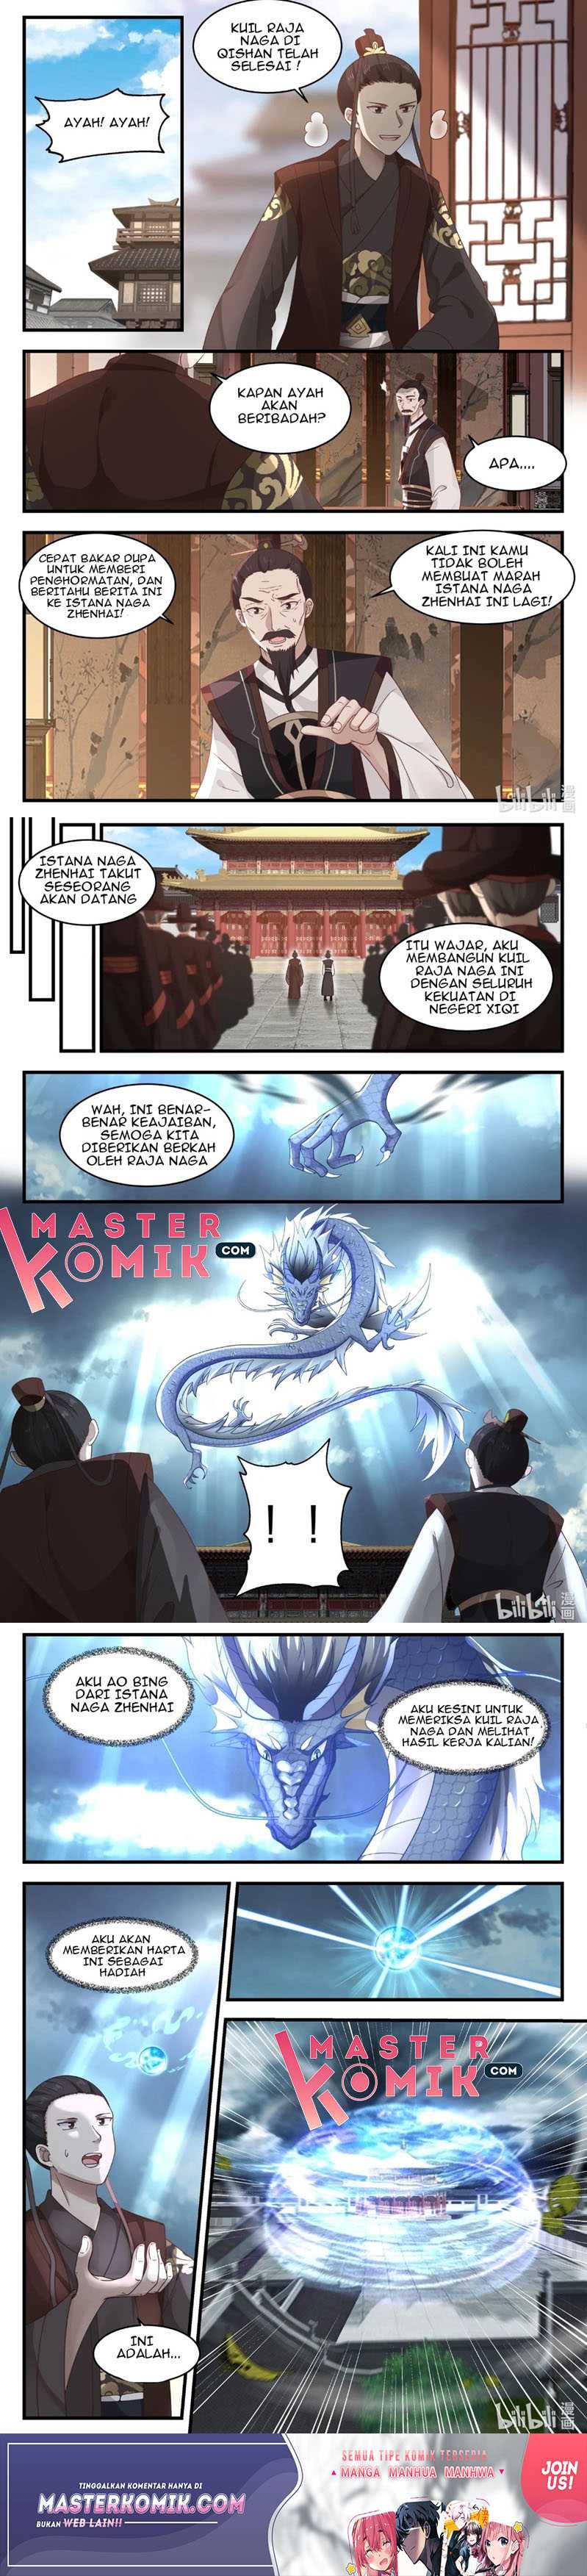 Dragon Throne Chapter 45